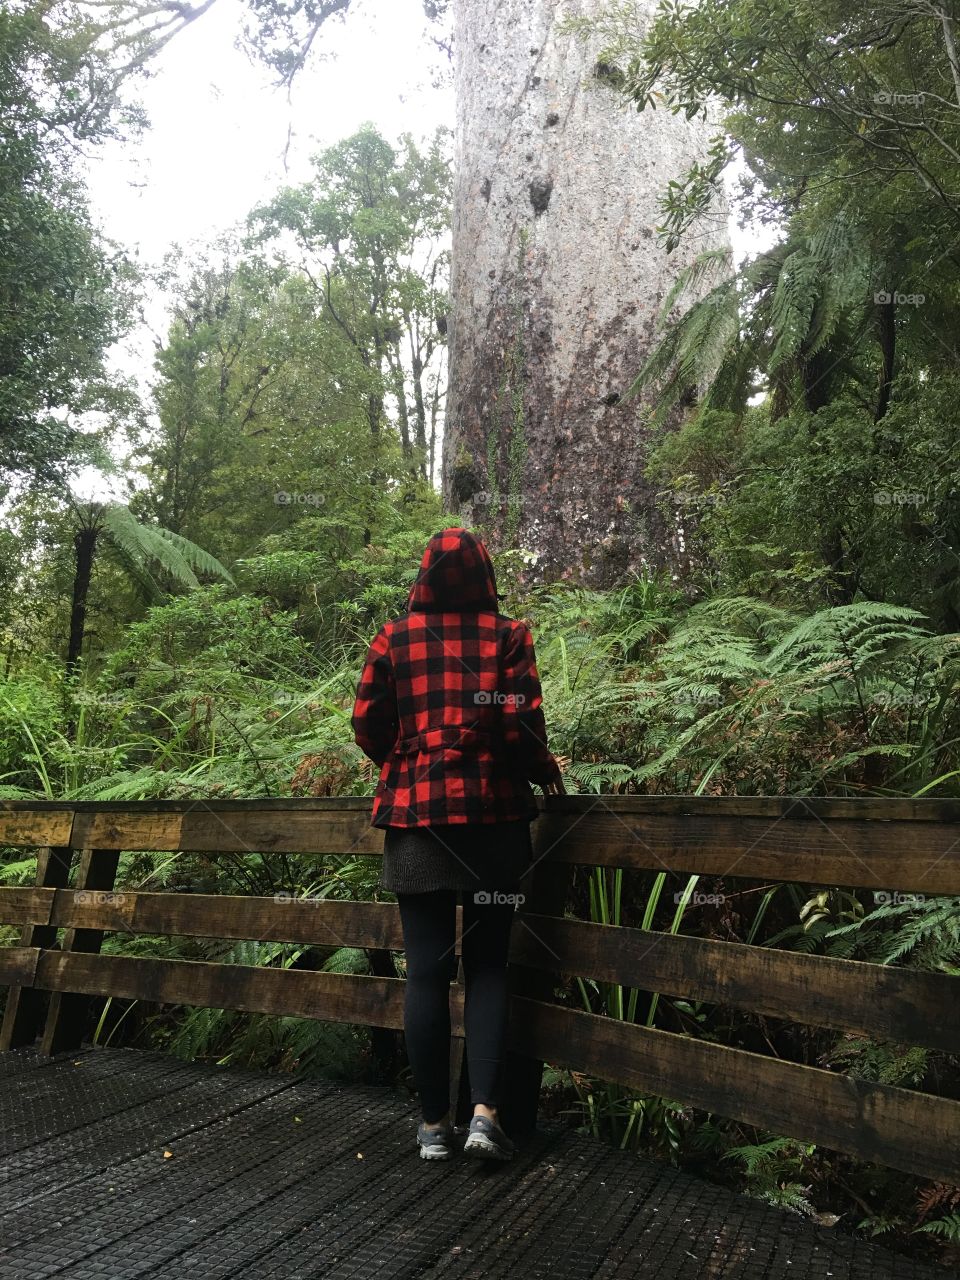 The largest tree in New Zealand is breathtaking 